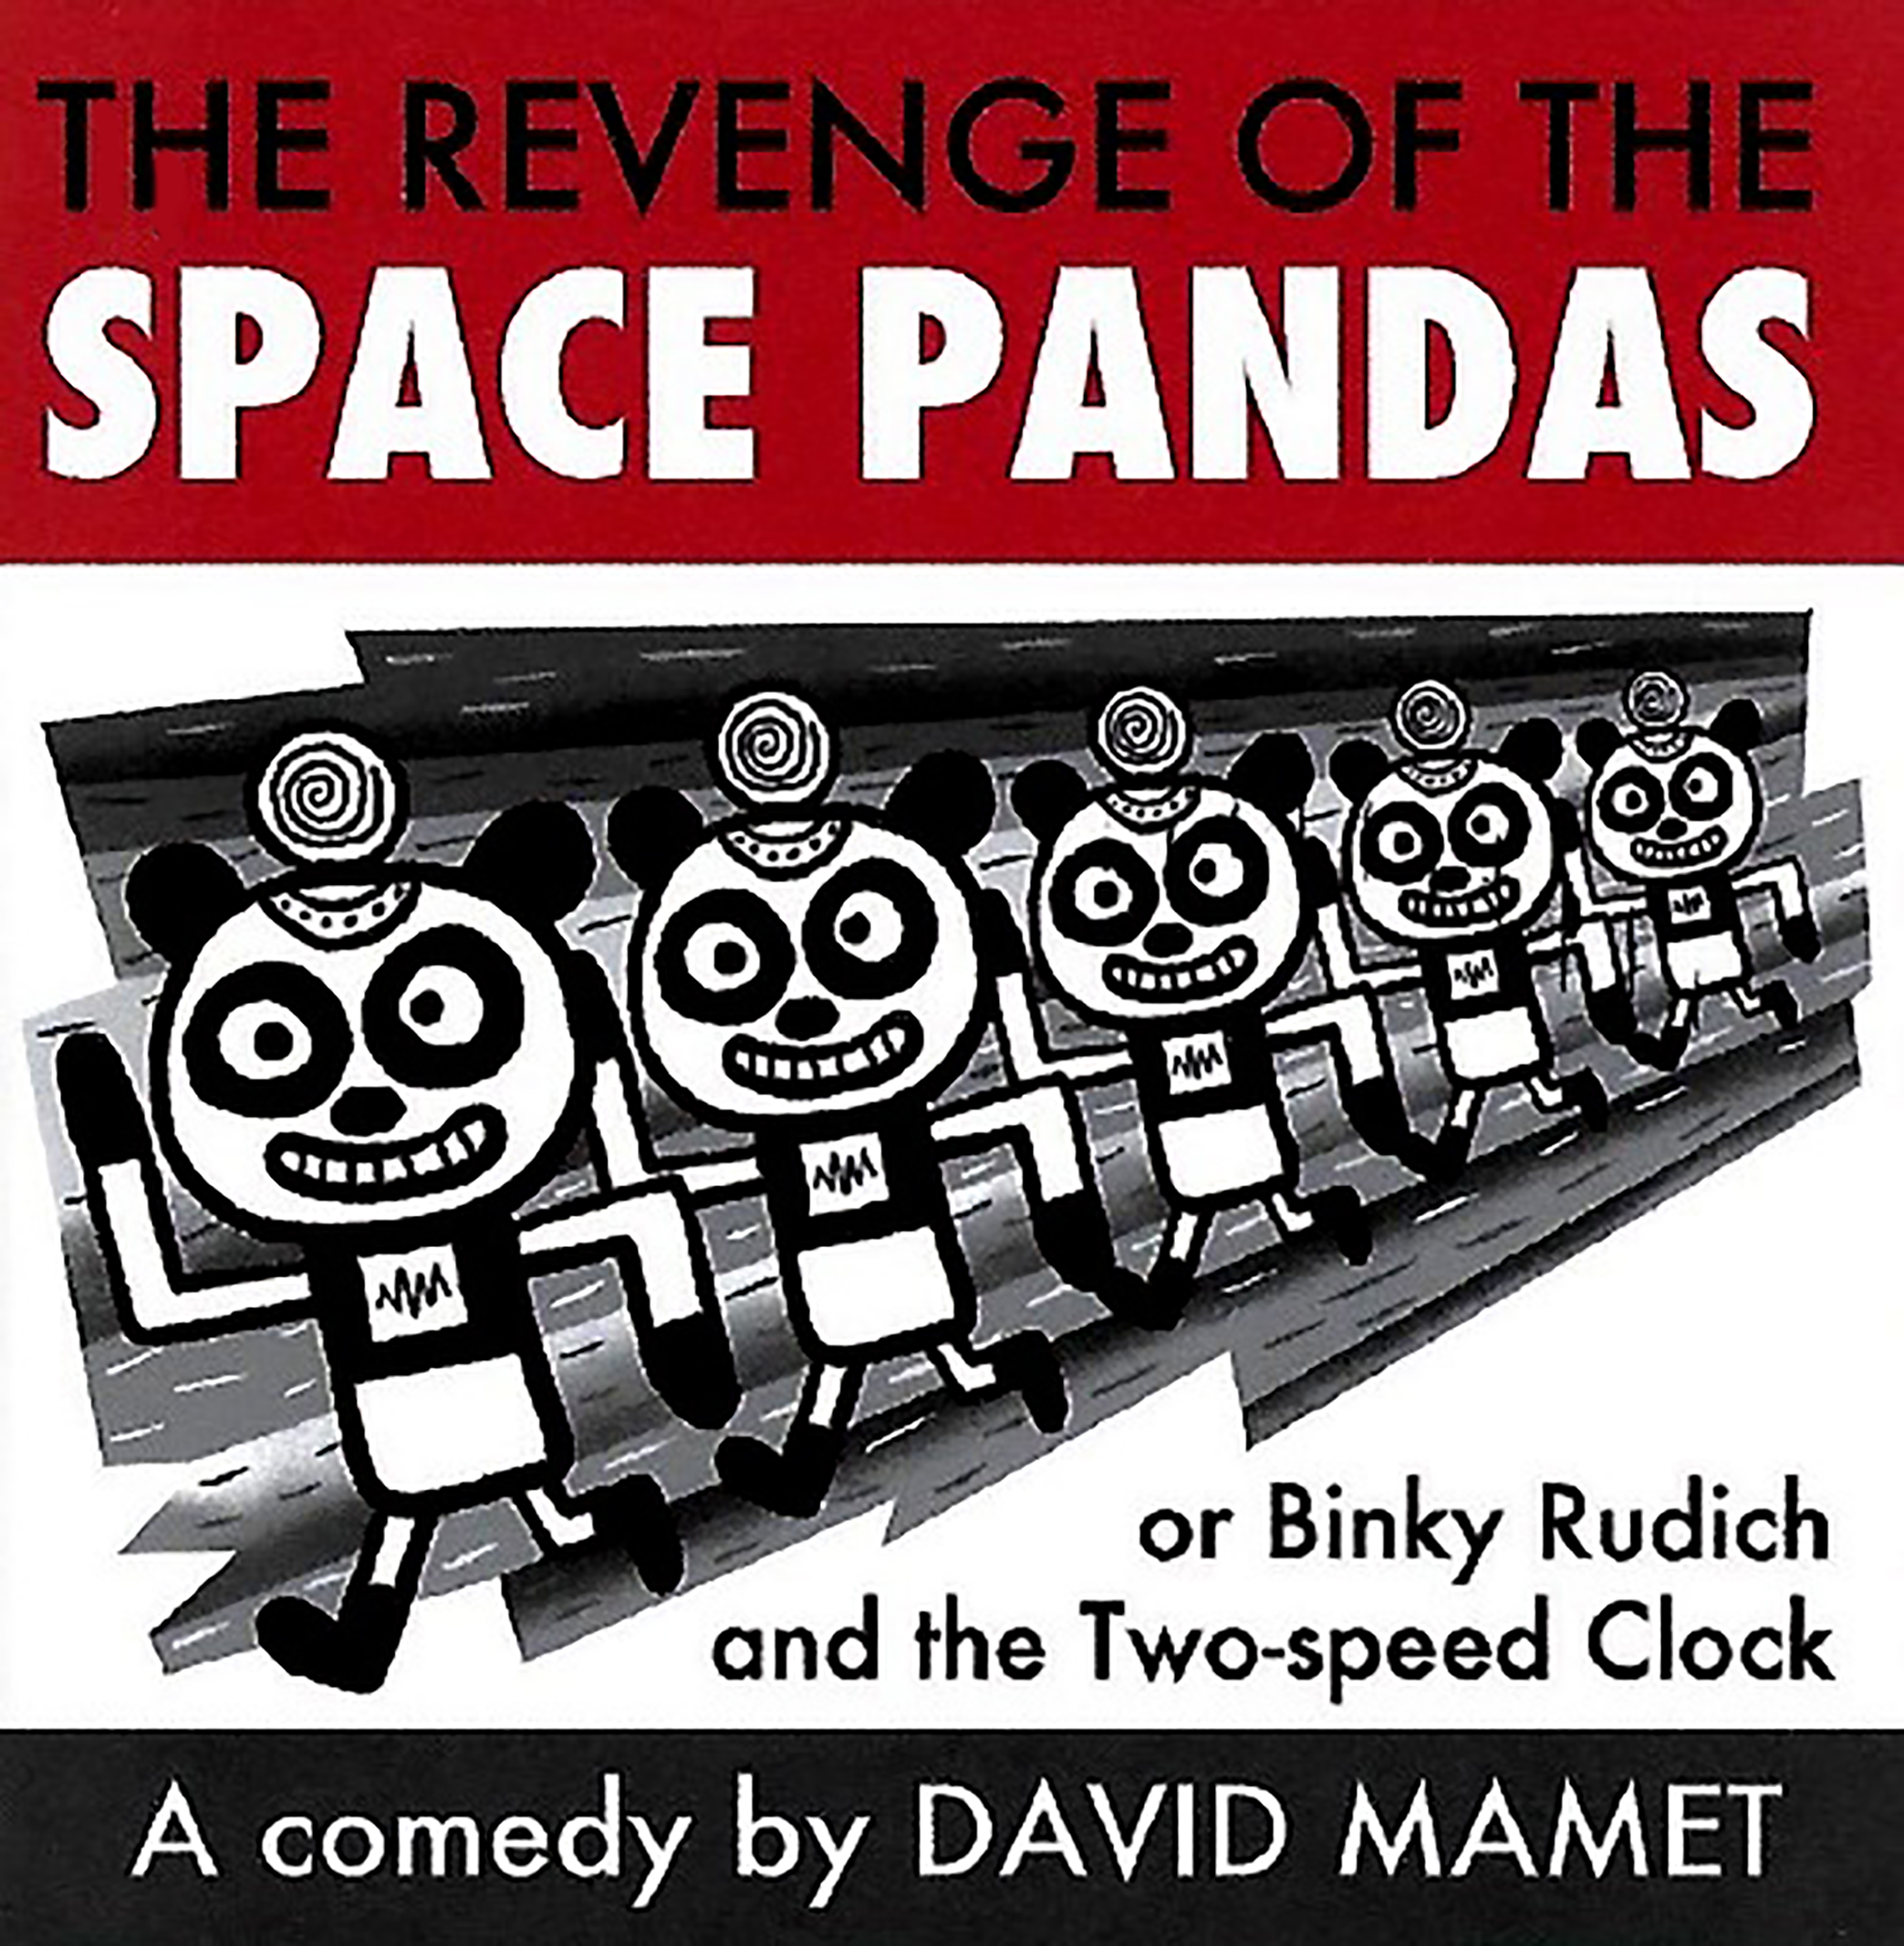 The Revenge of the Space Pandas